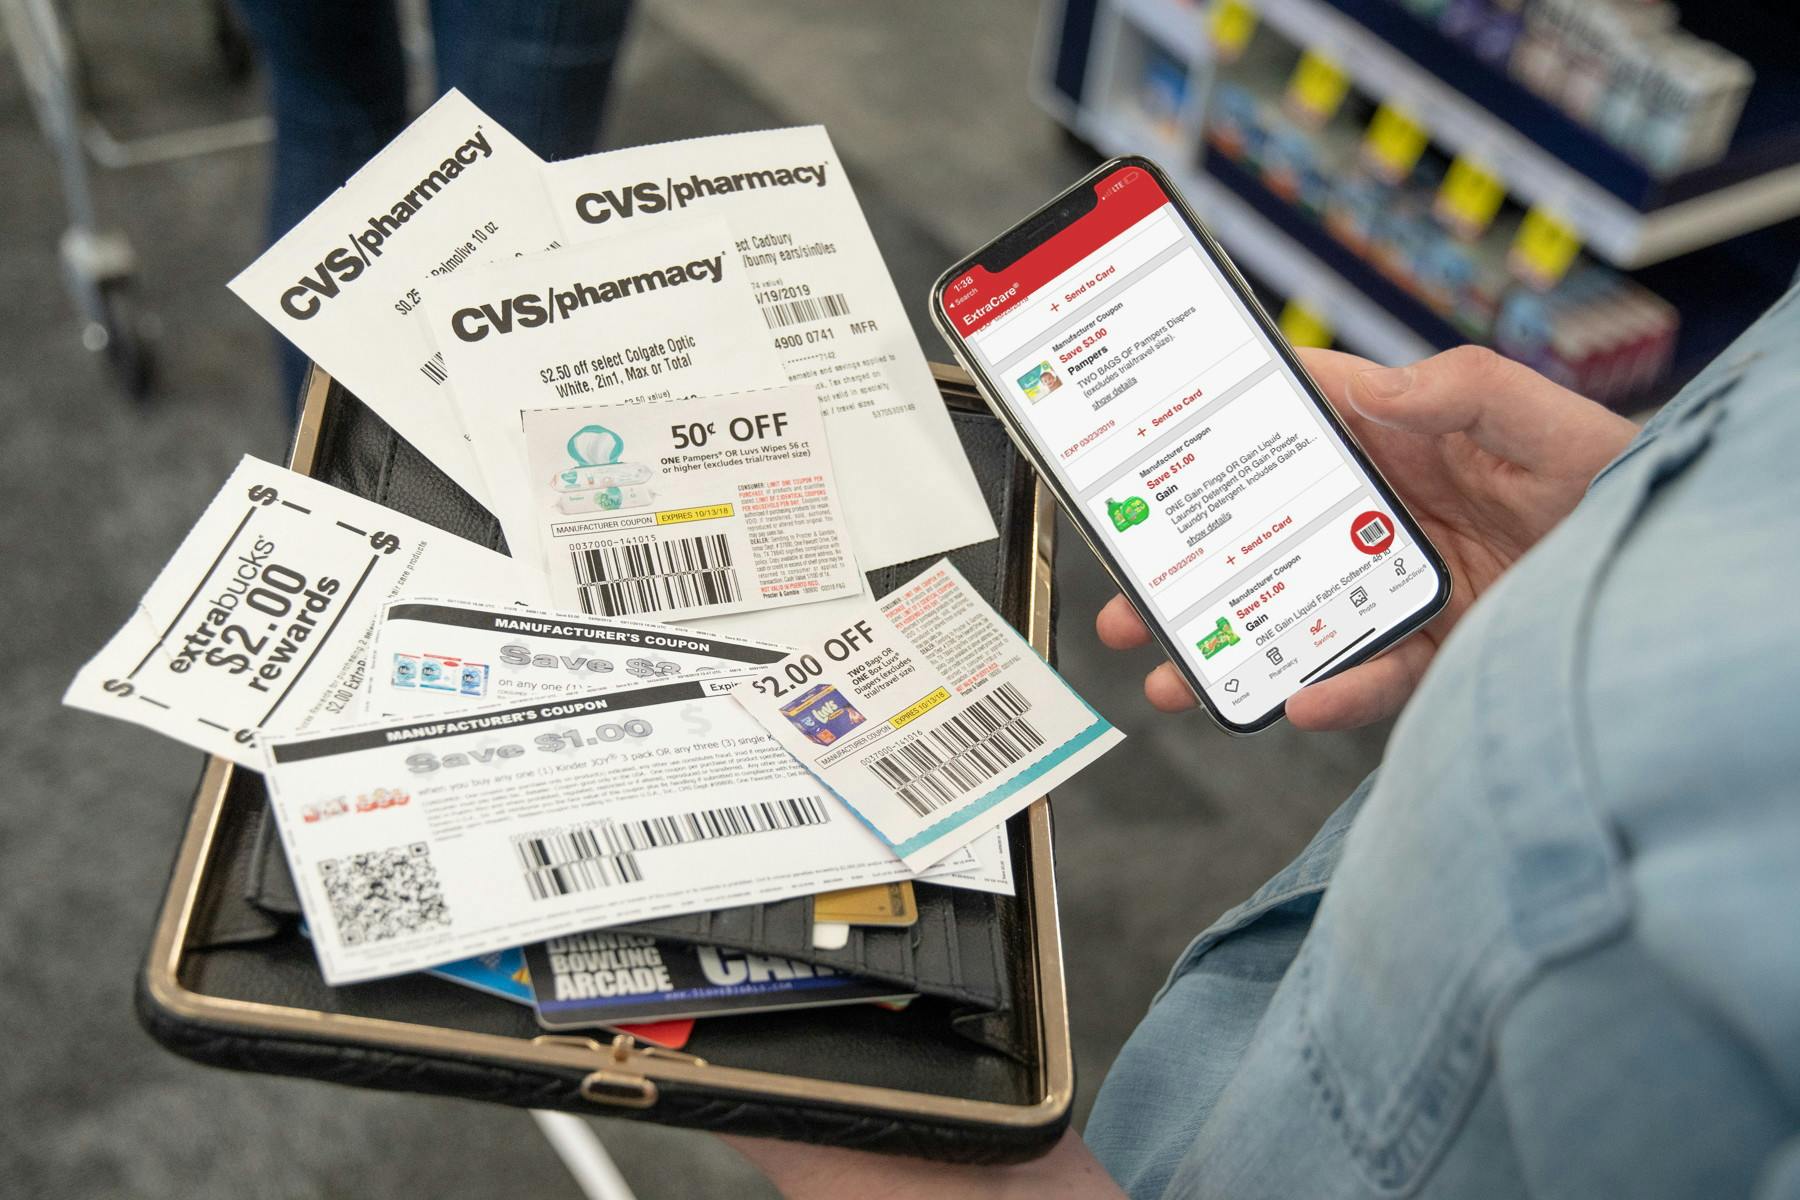 A person holding a cellphone displaying the CVS app next to a stack of coupons sitting on a wallet in the person's other hand.